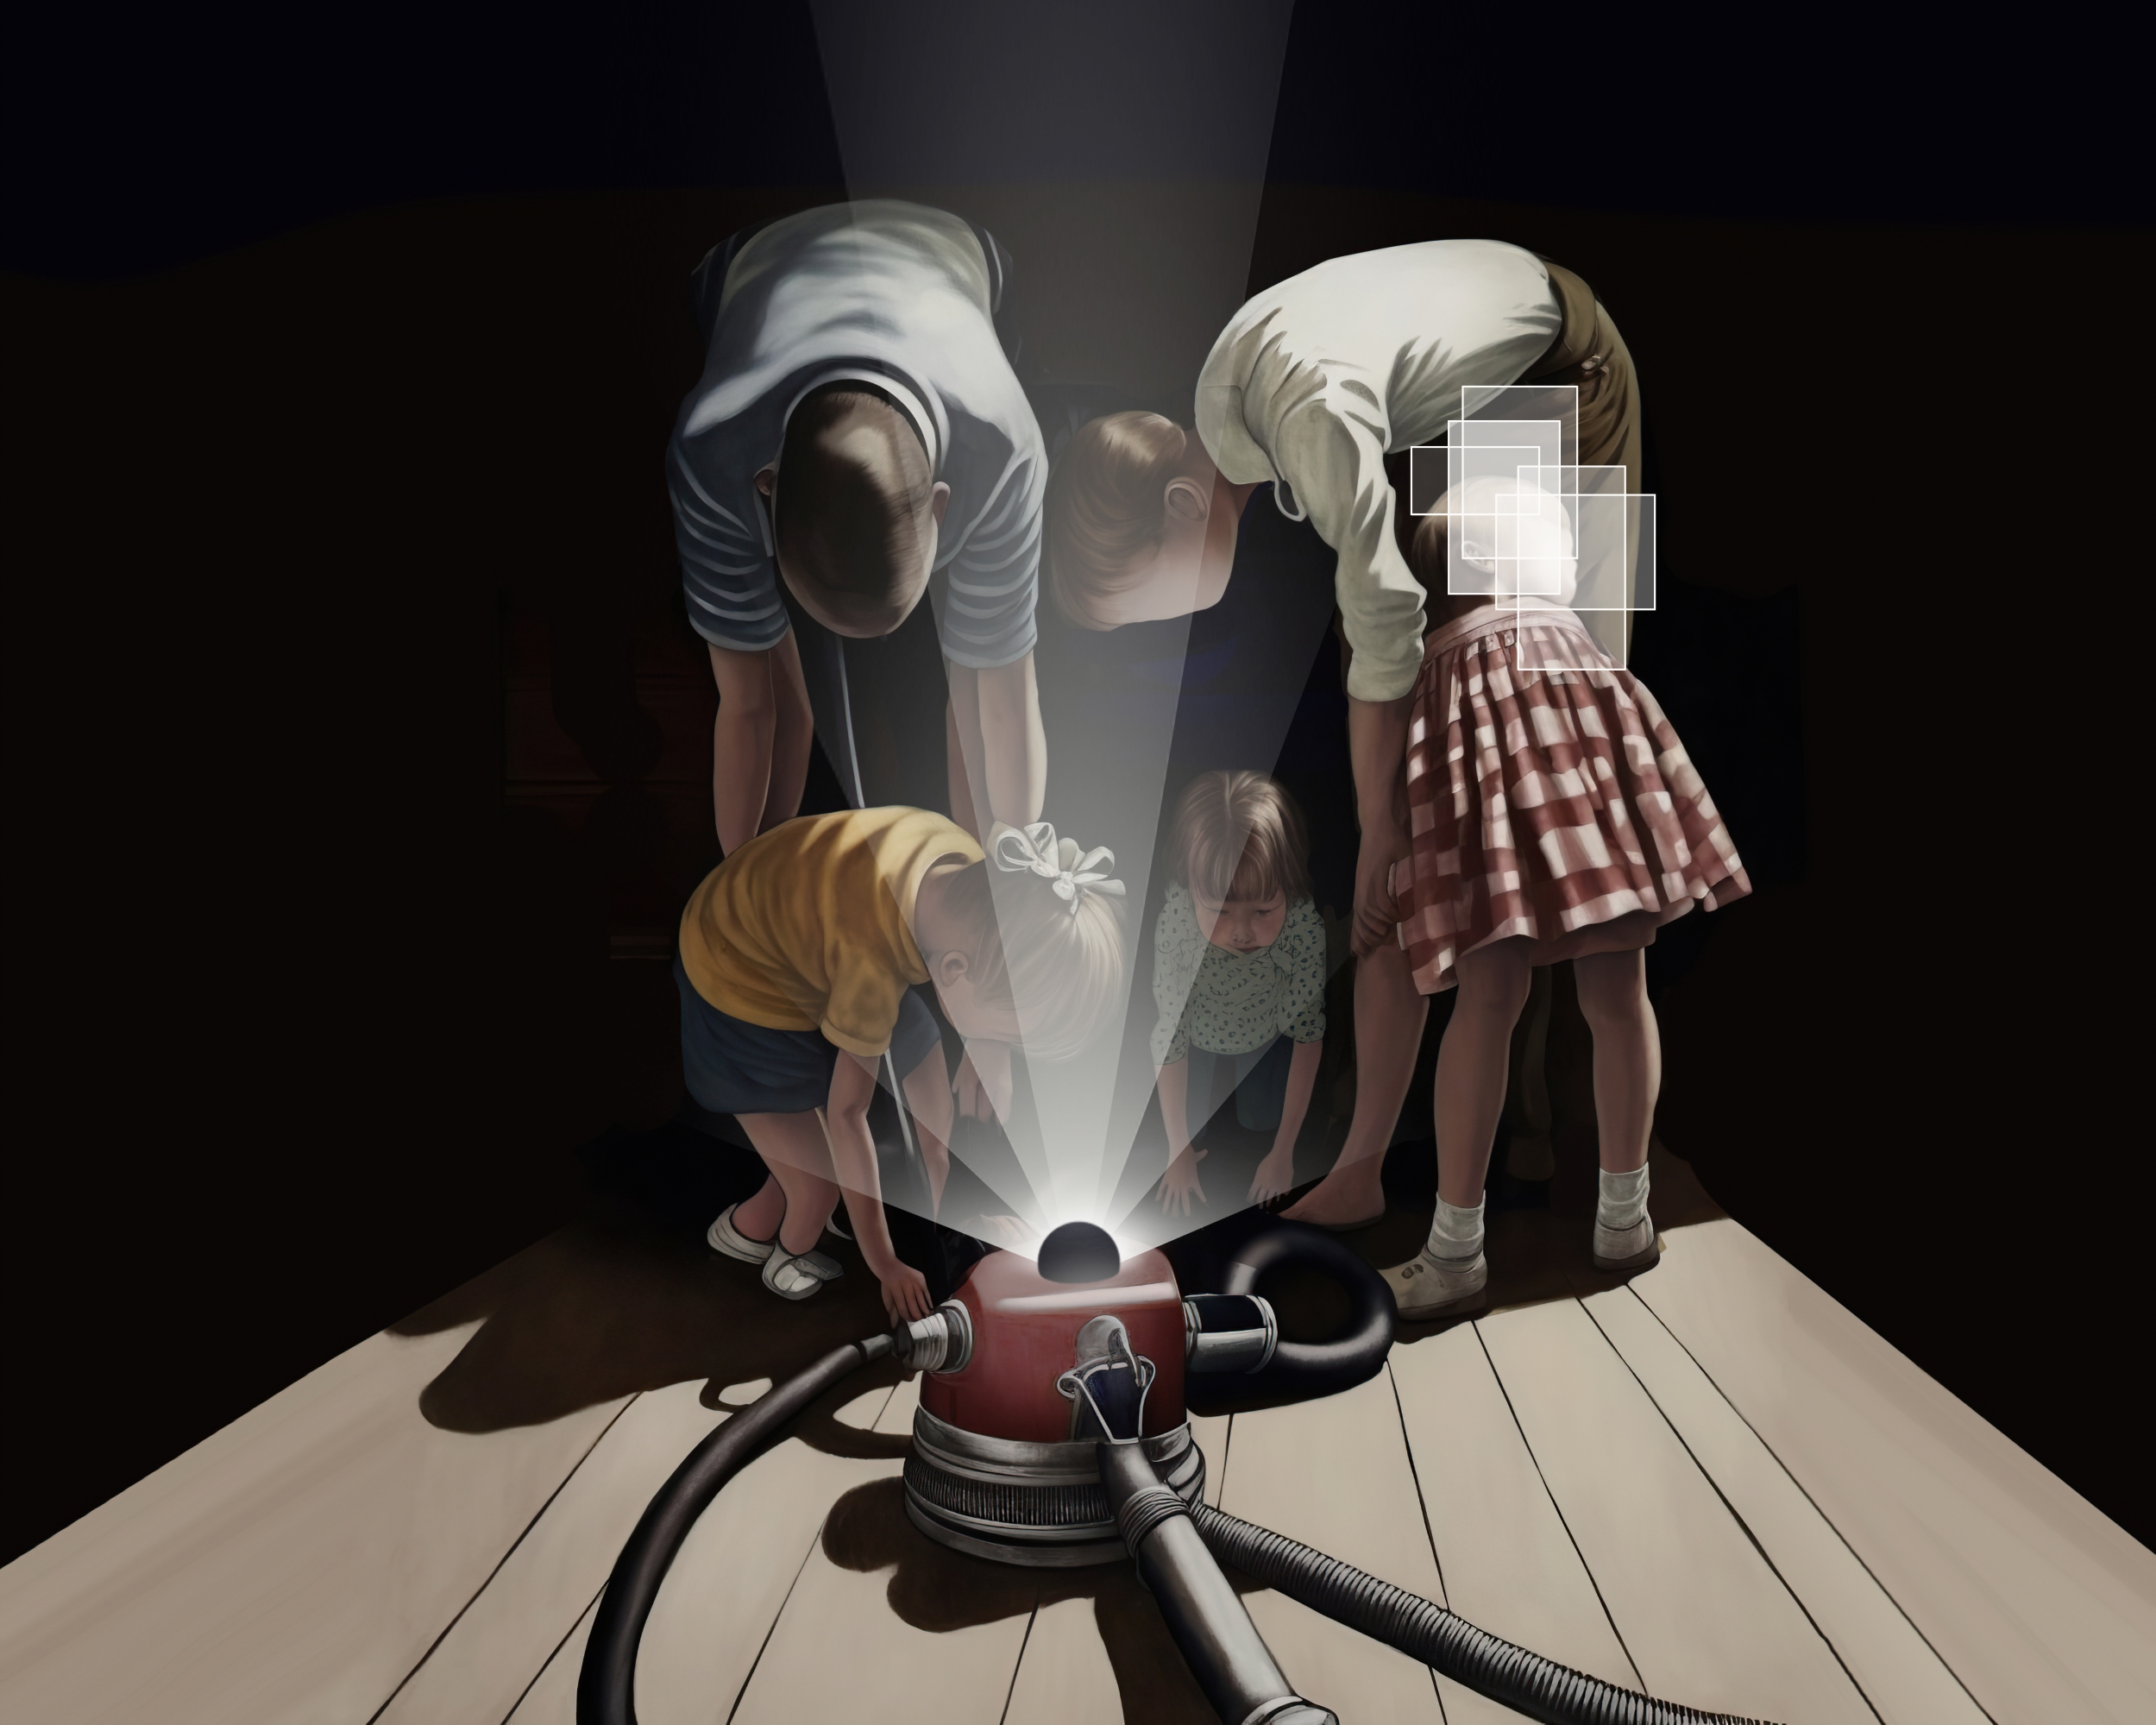 family bent over a vacuum. light emitting from the vaccuum shines on their obscured faces.